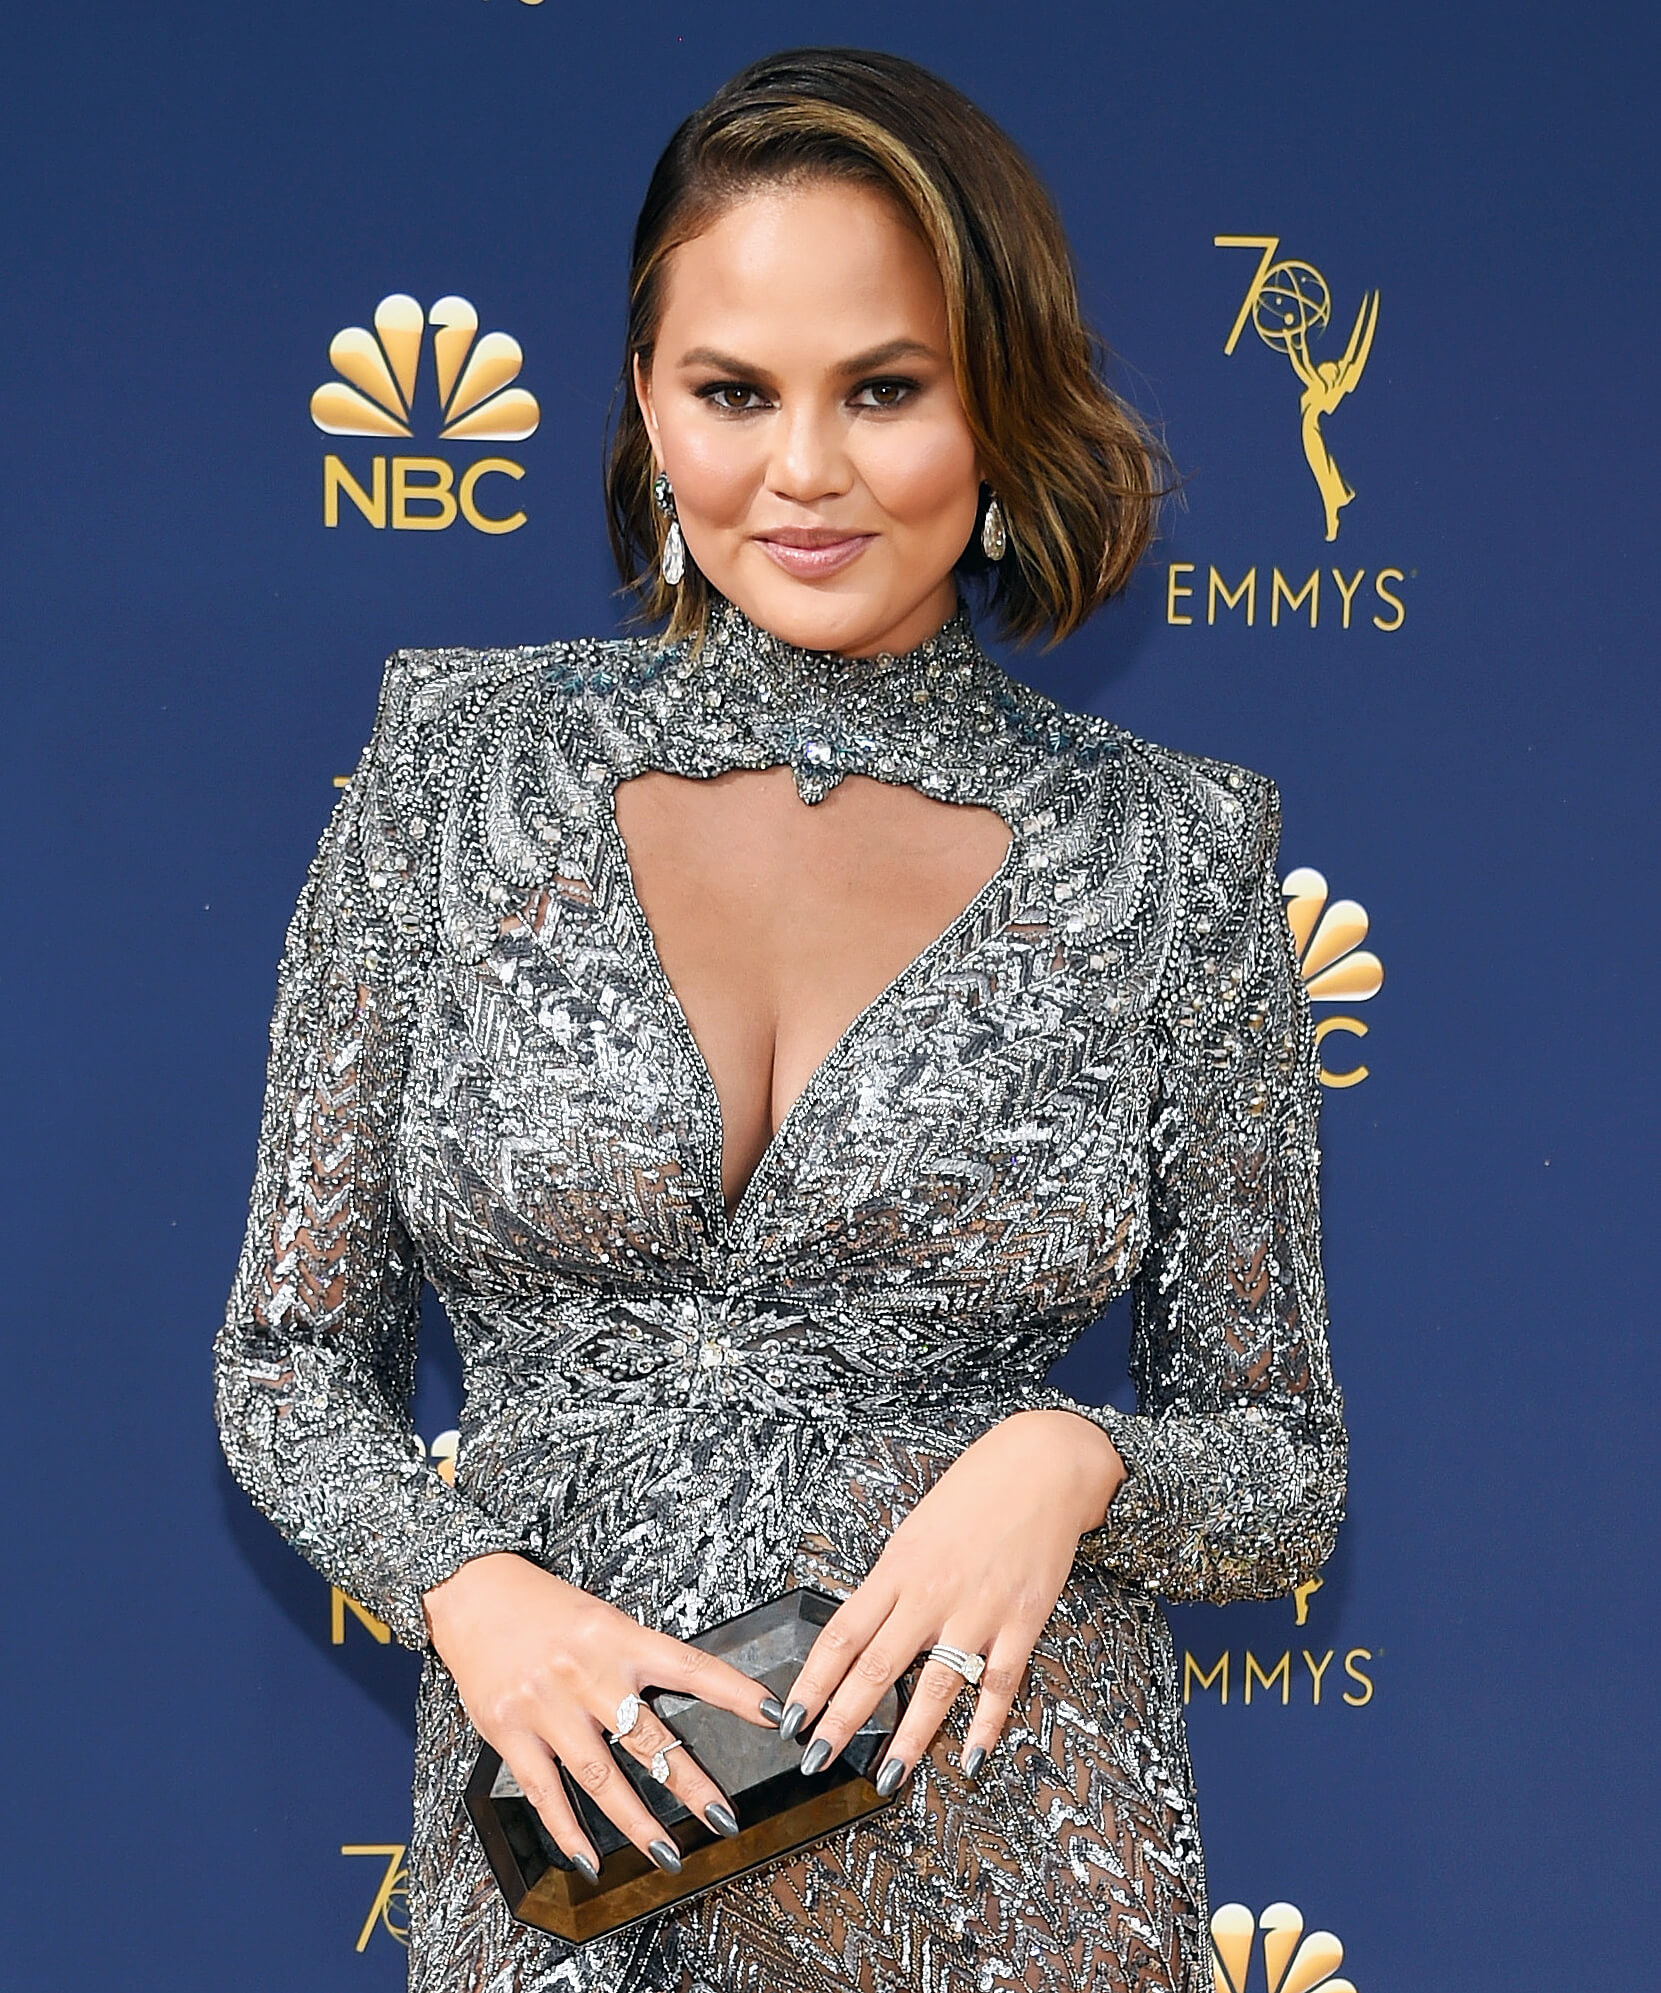 70+ Hottest Chrissy Teigen Pictures That Are Too Hot To Handle 157